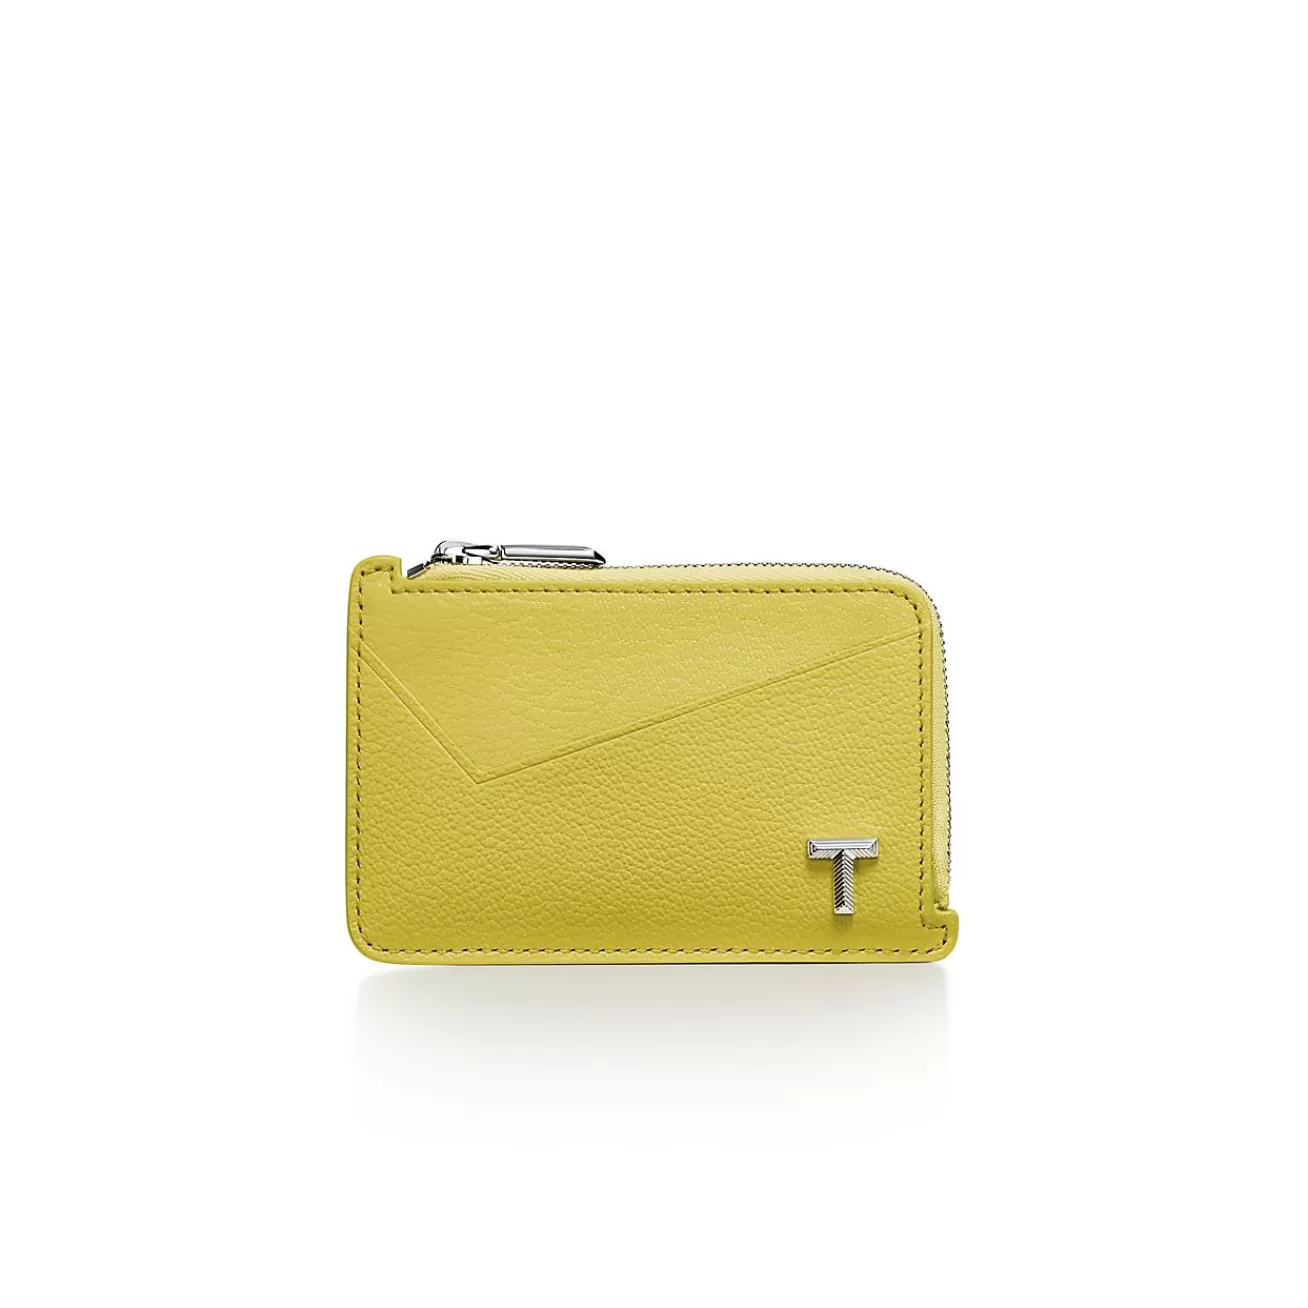 Tiffany & Co. Tiffany T Zip Card Case in Citrine Yellow Leather | ^Women Small Leather Goods | Women's Accessories